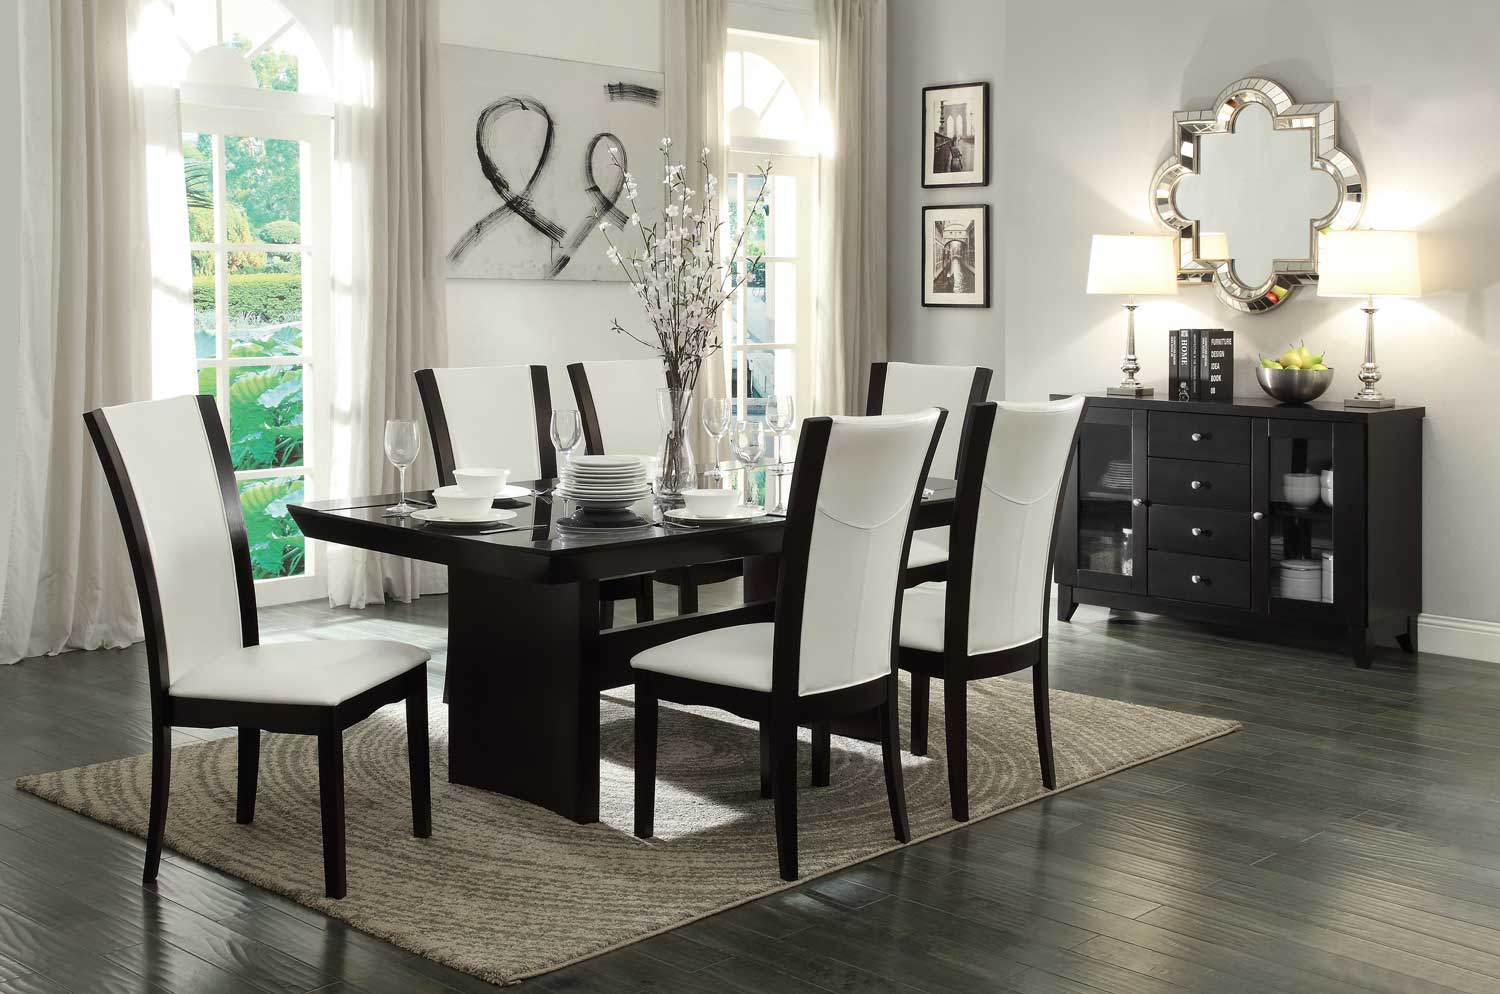 Homelegance Daisy Dining Table with Glass Insert Collection